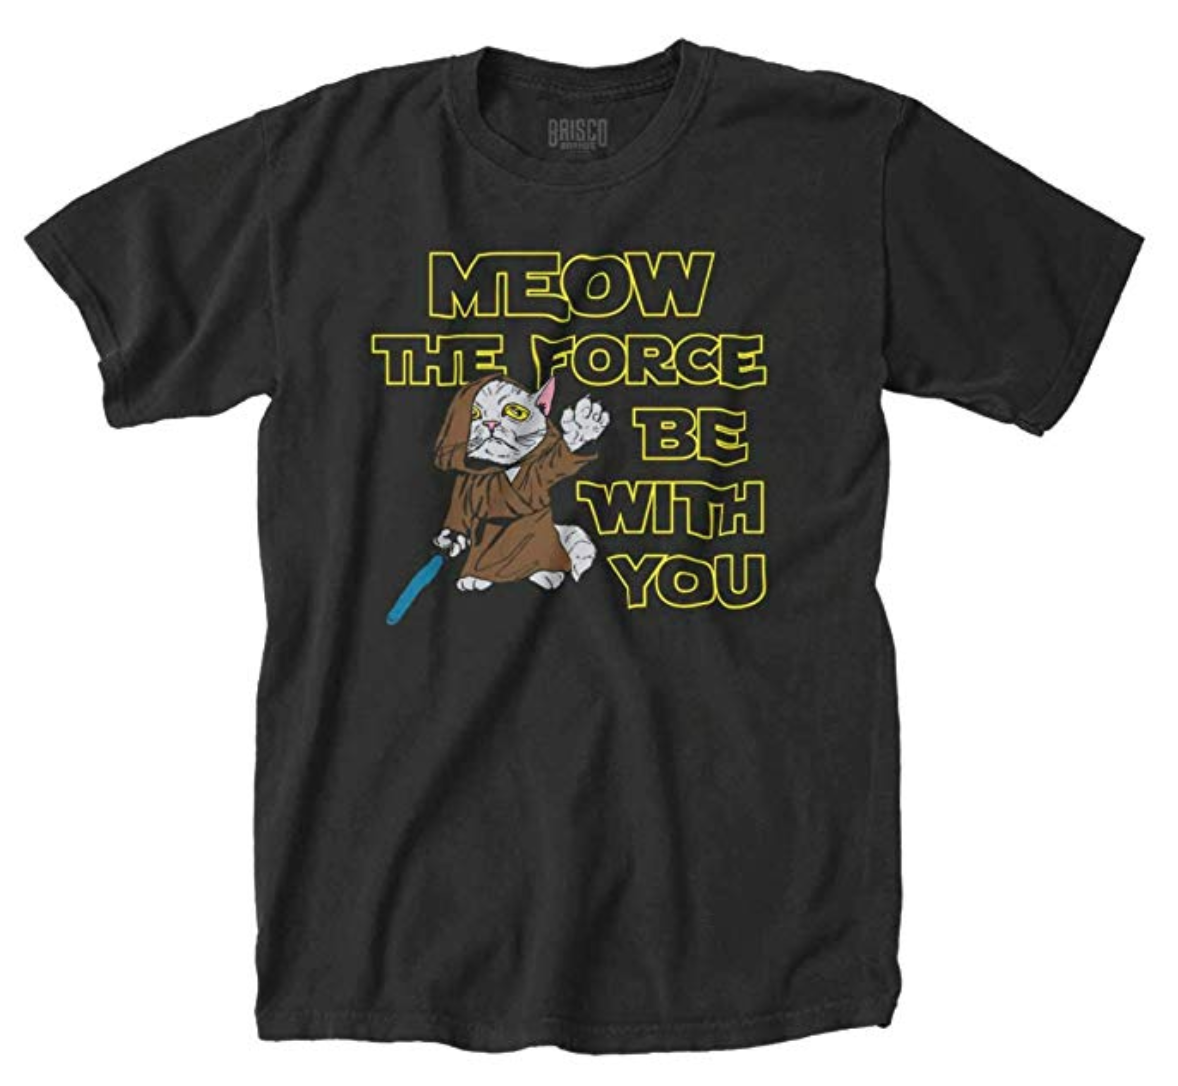 Star Wars Meow the Force Be With You T-shirt